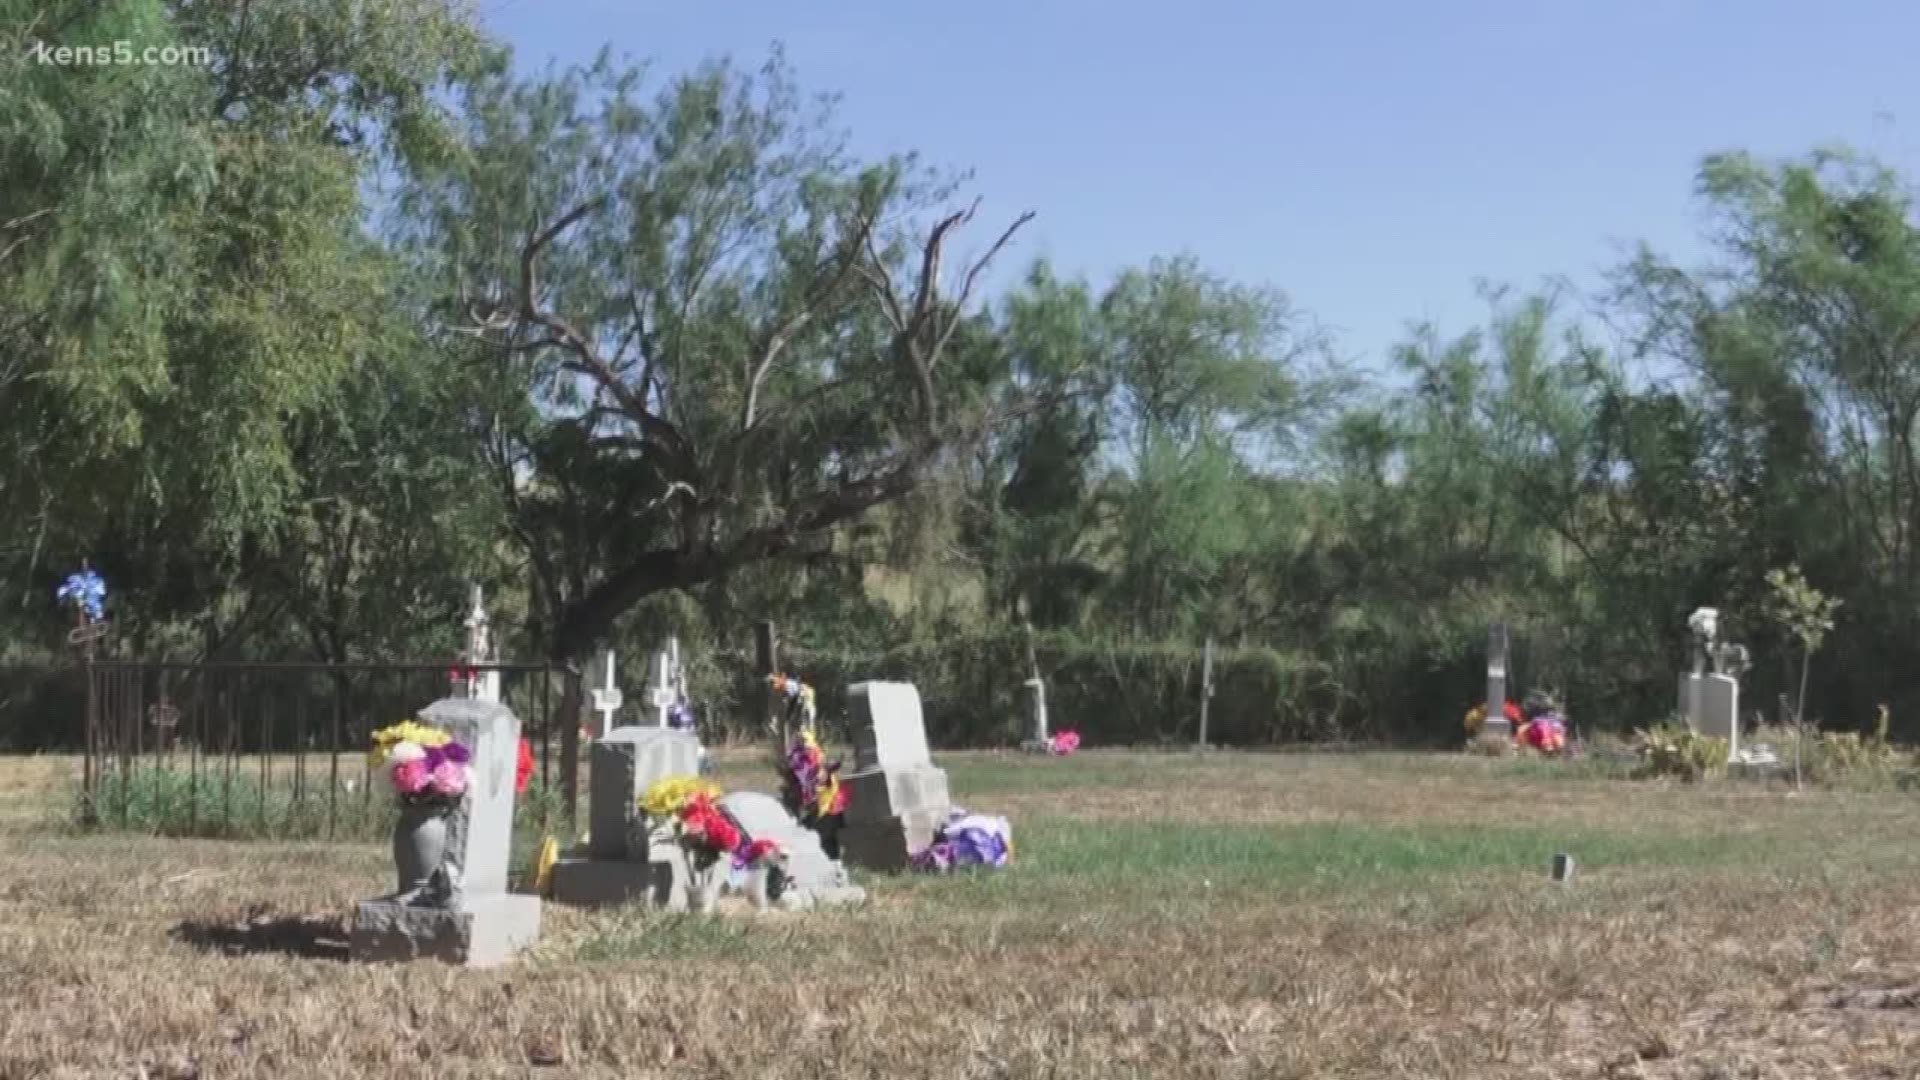 Customs and Border Protection announced last week that it awarded contracts to build 11 miles of new border wall in the Rio Grande Valley. Right next to the path of the wall is the 154-year-old Eli Jackson Cemetery.